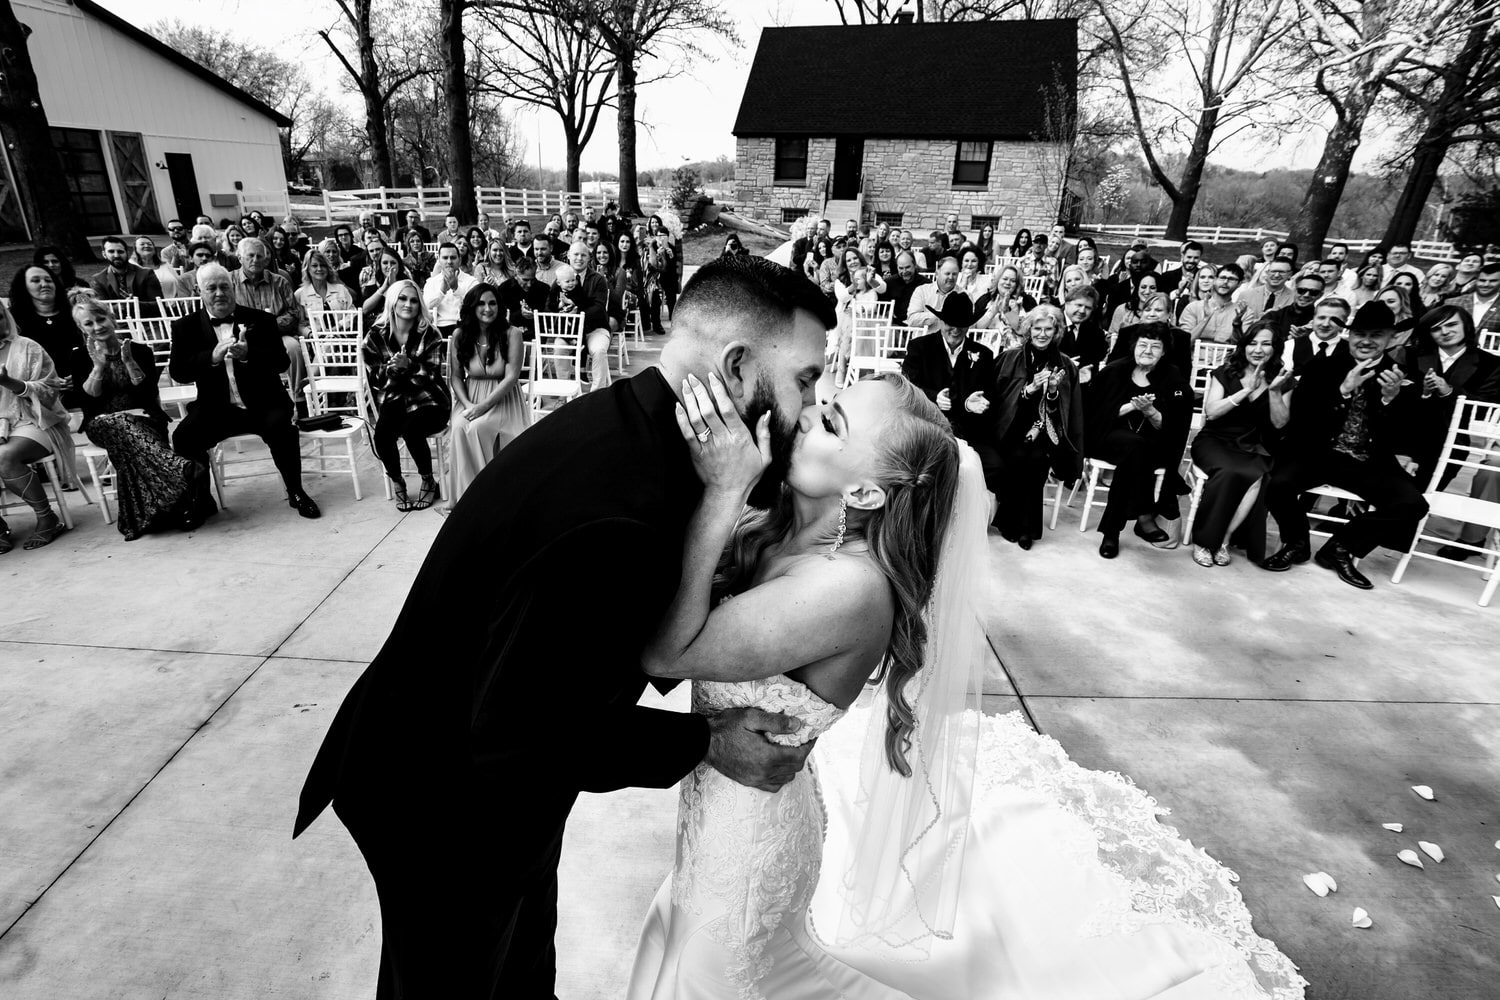 A candid black and white picture of a bride and groom sharing their first kiss, their family and friends visible in the background clapping and cheering. 